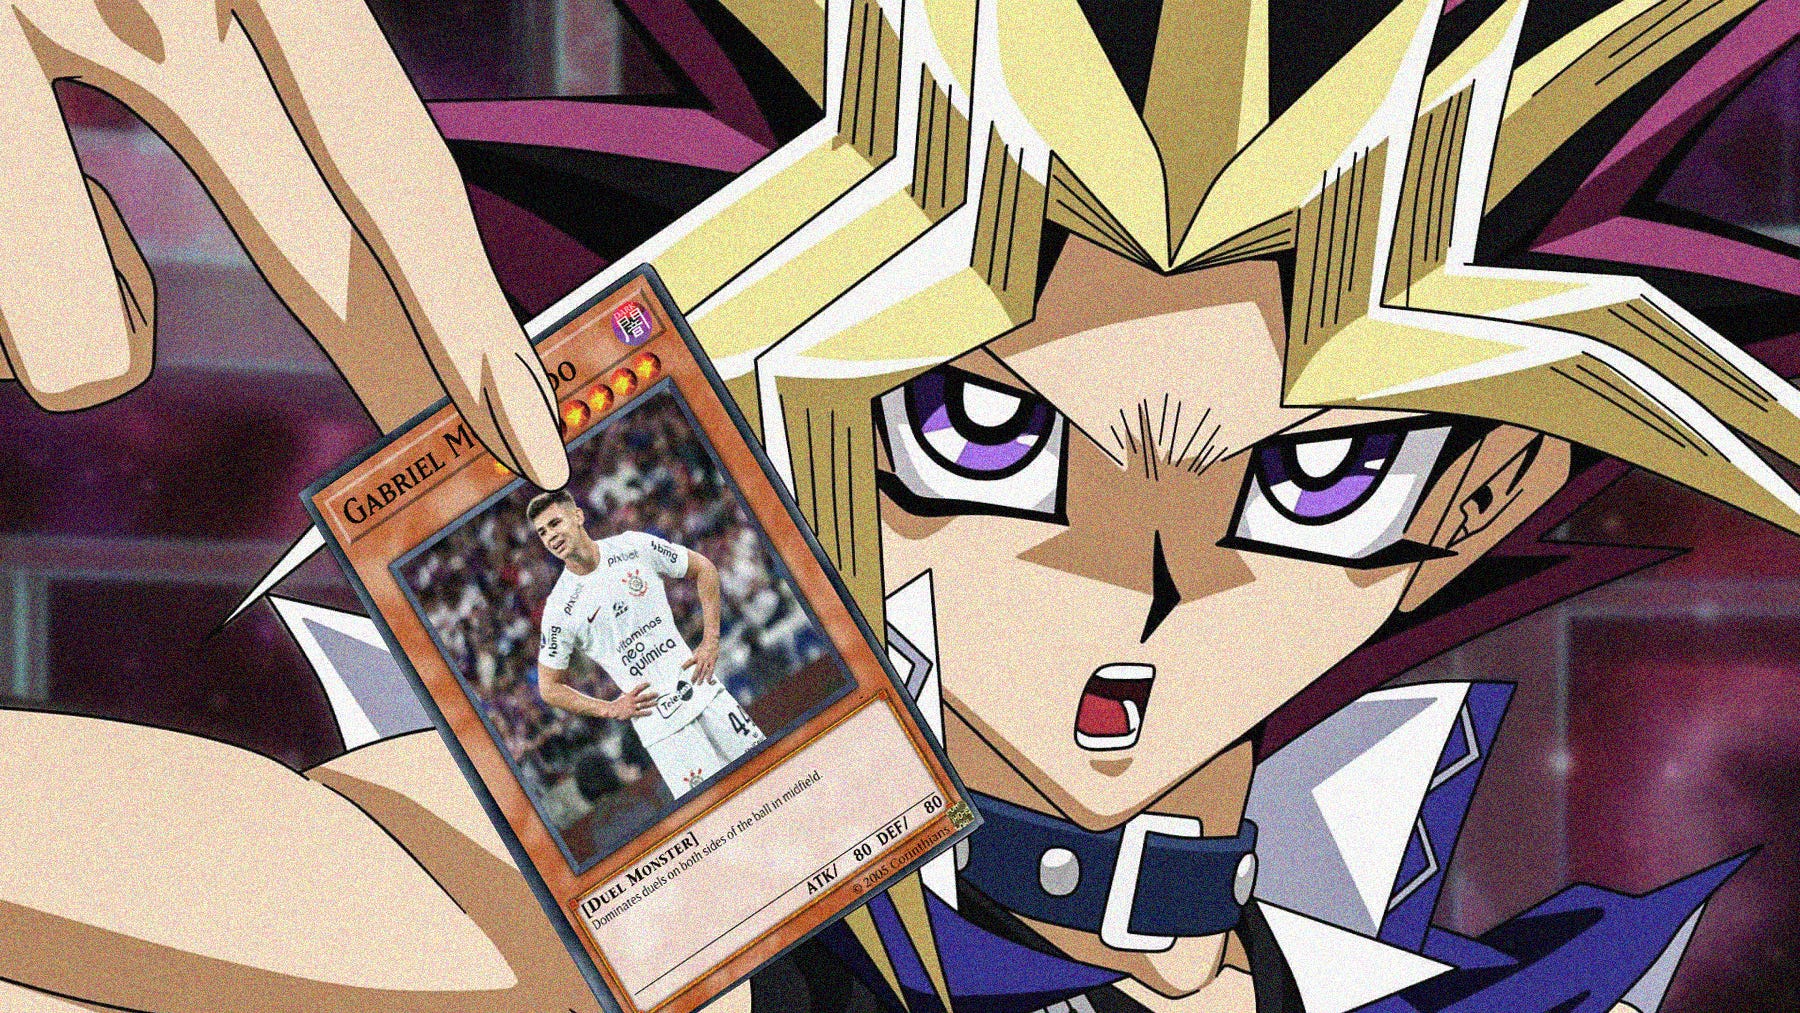 A close-up of a Yu-Gi-Oh character holding a Gabriel Moscardo card.